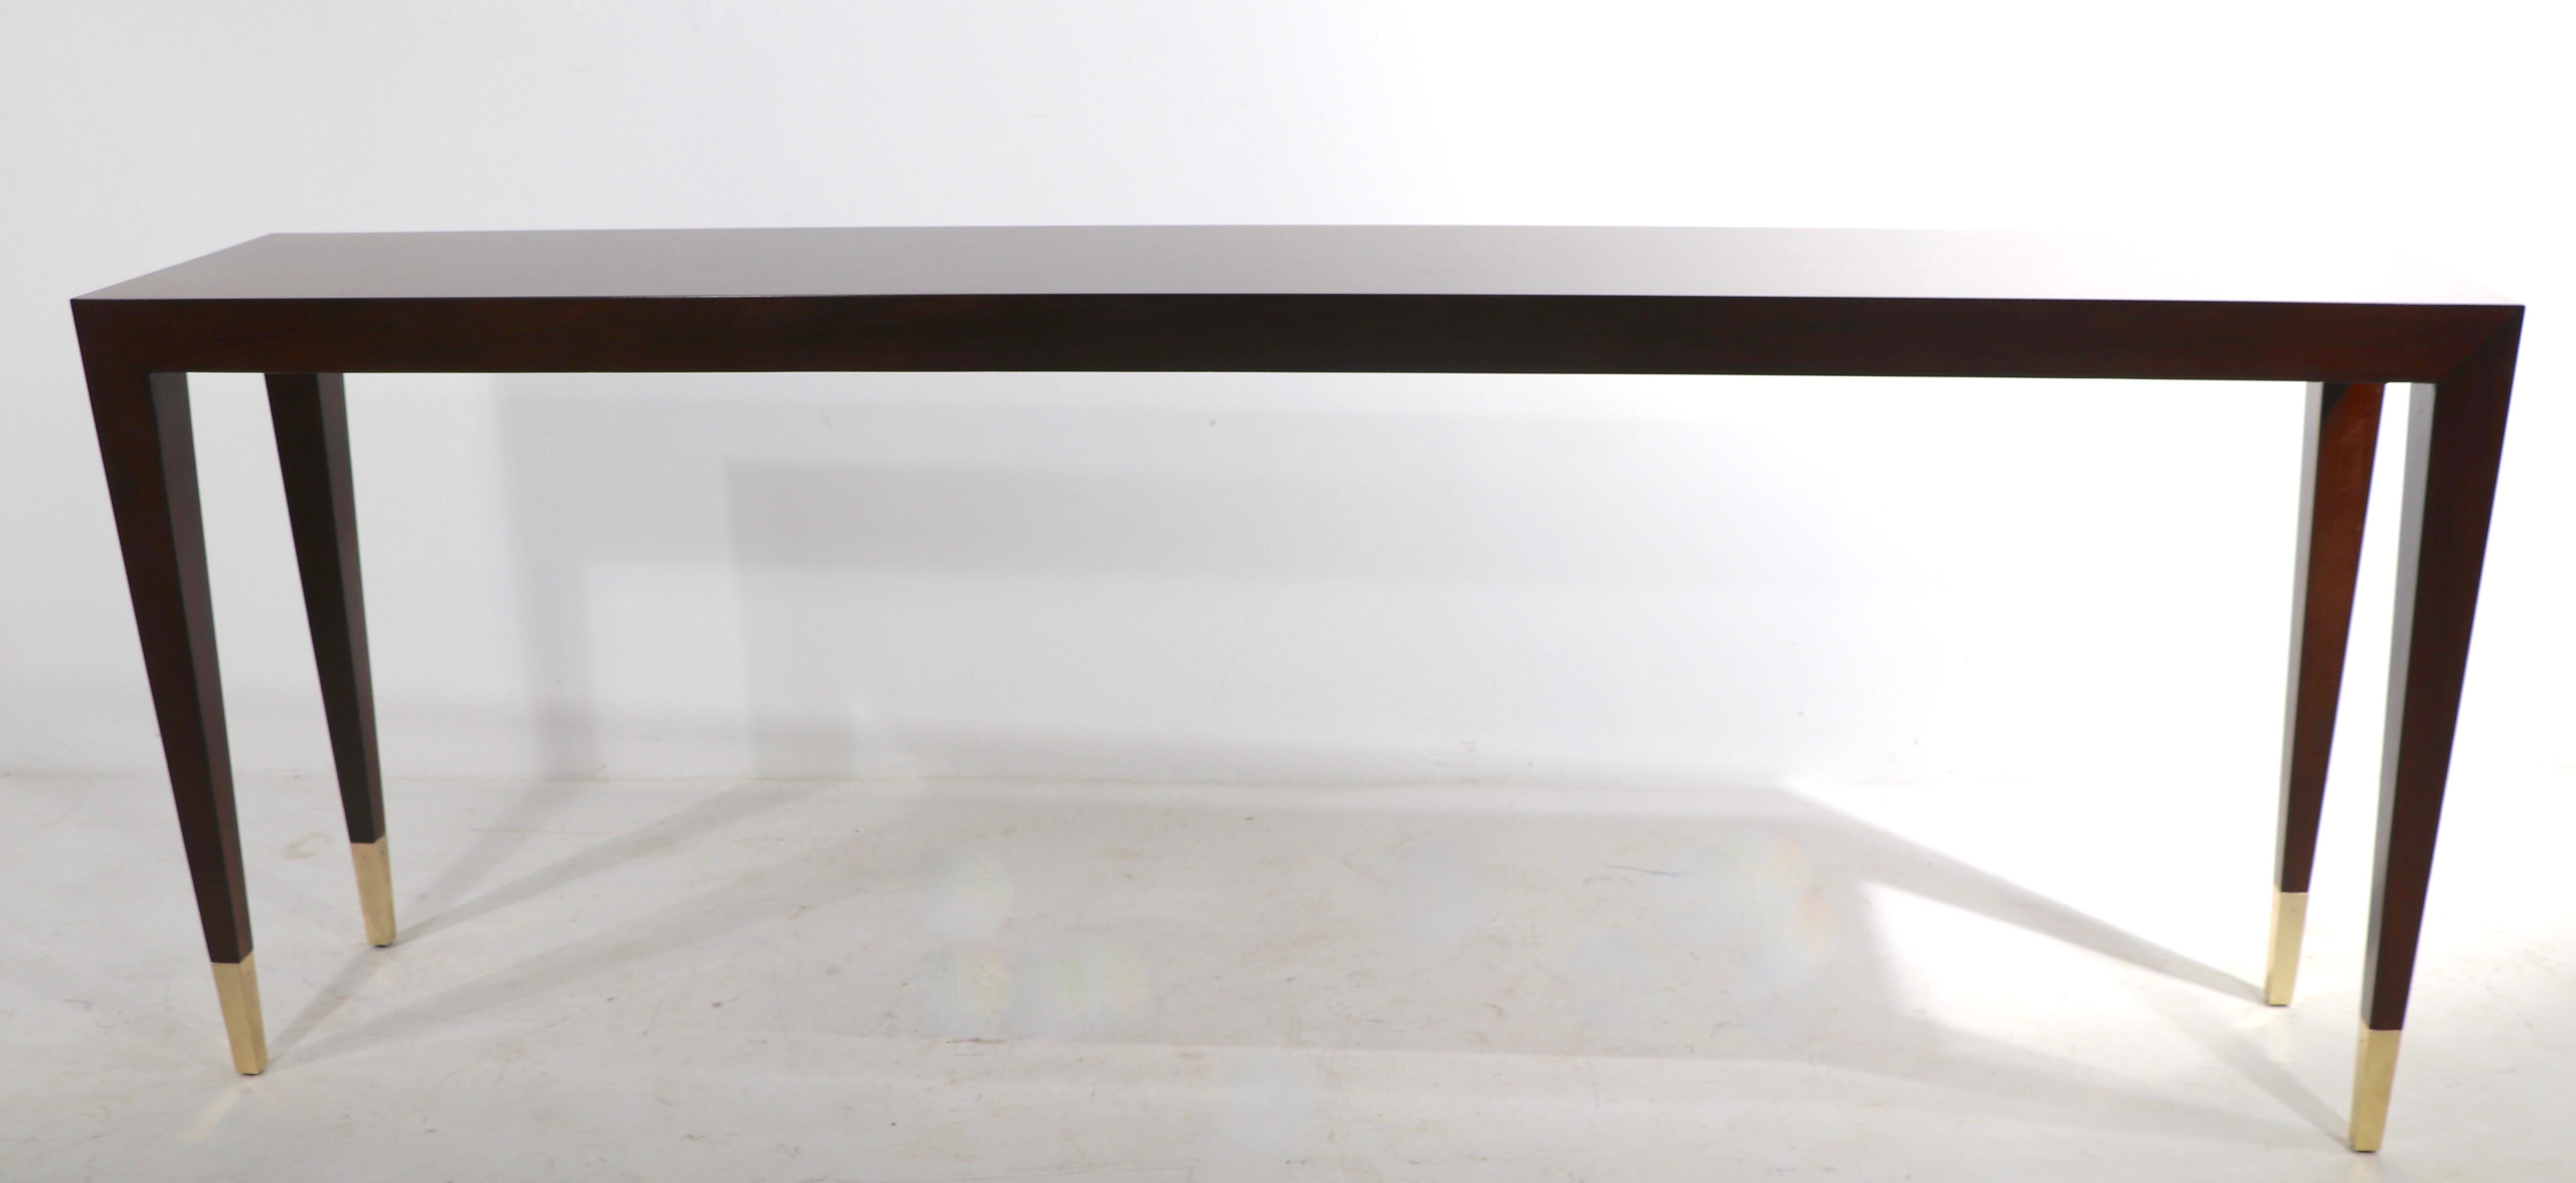 Elegant Extra Long Console Table in the French Art Deco Style Marked Uovo 1